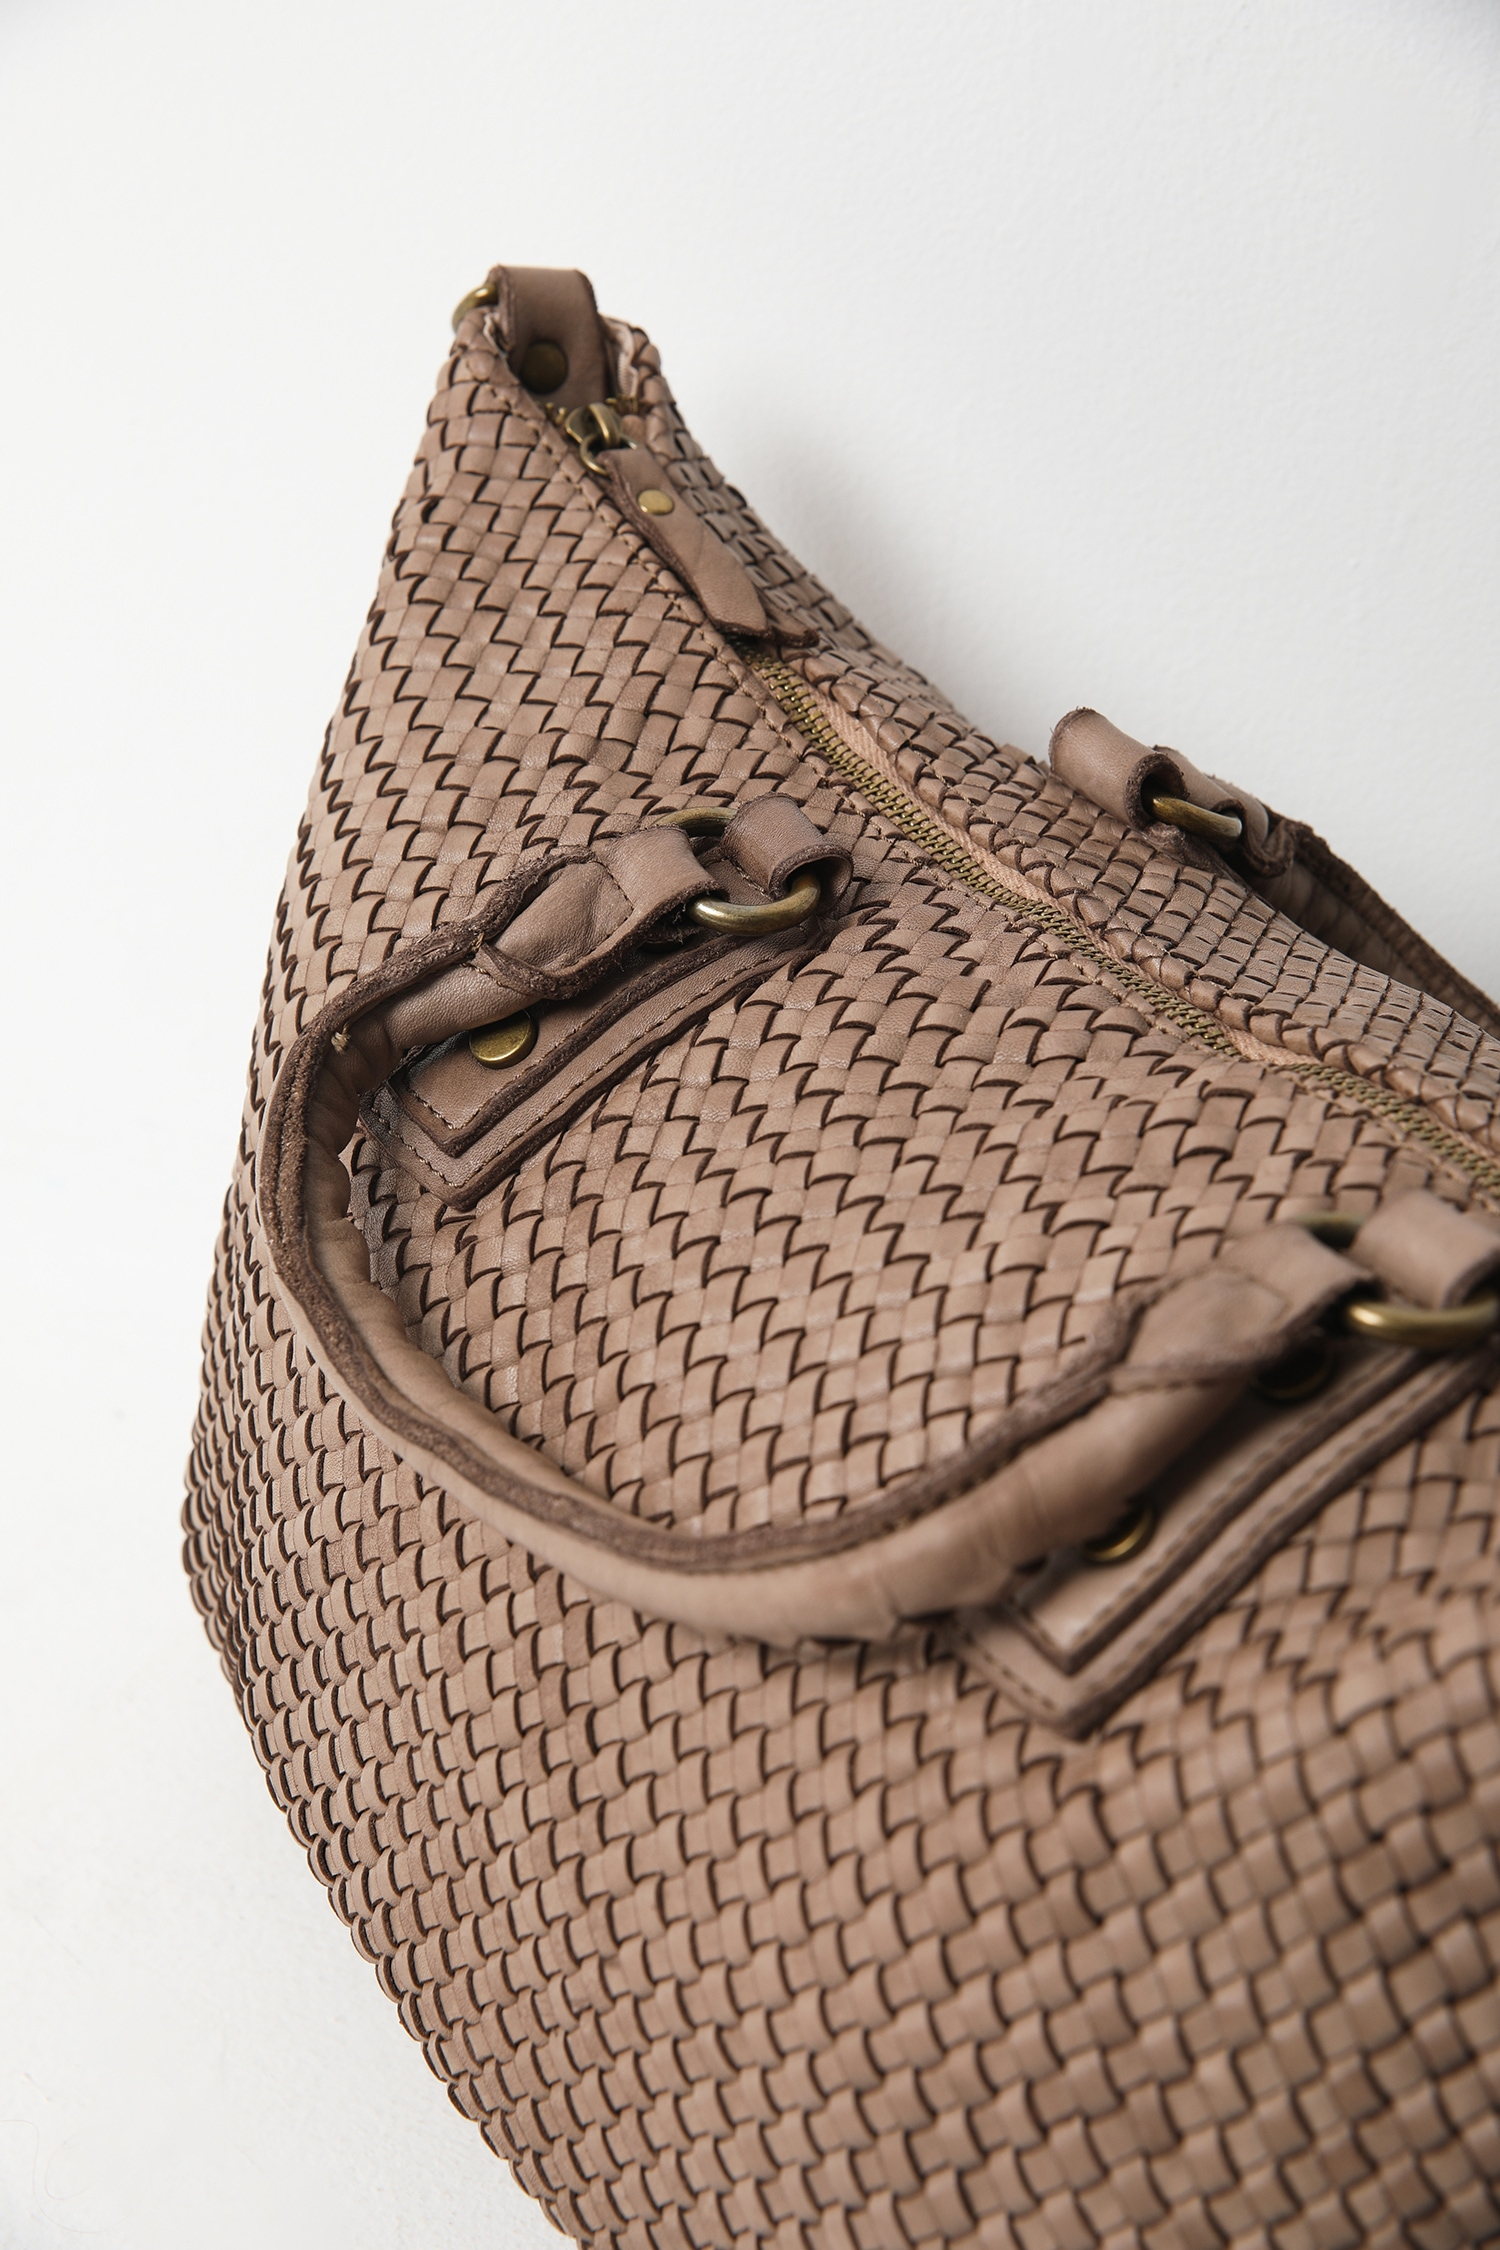 Braided leather tote bag